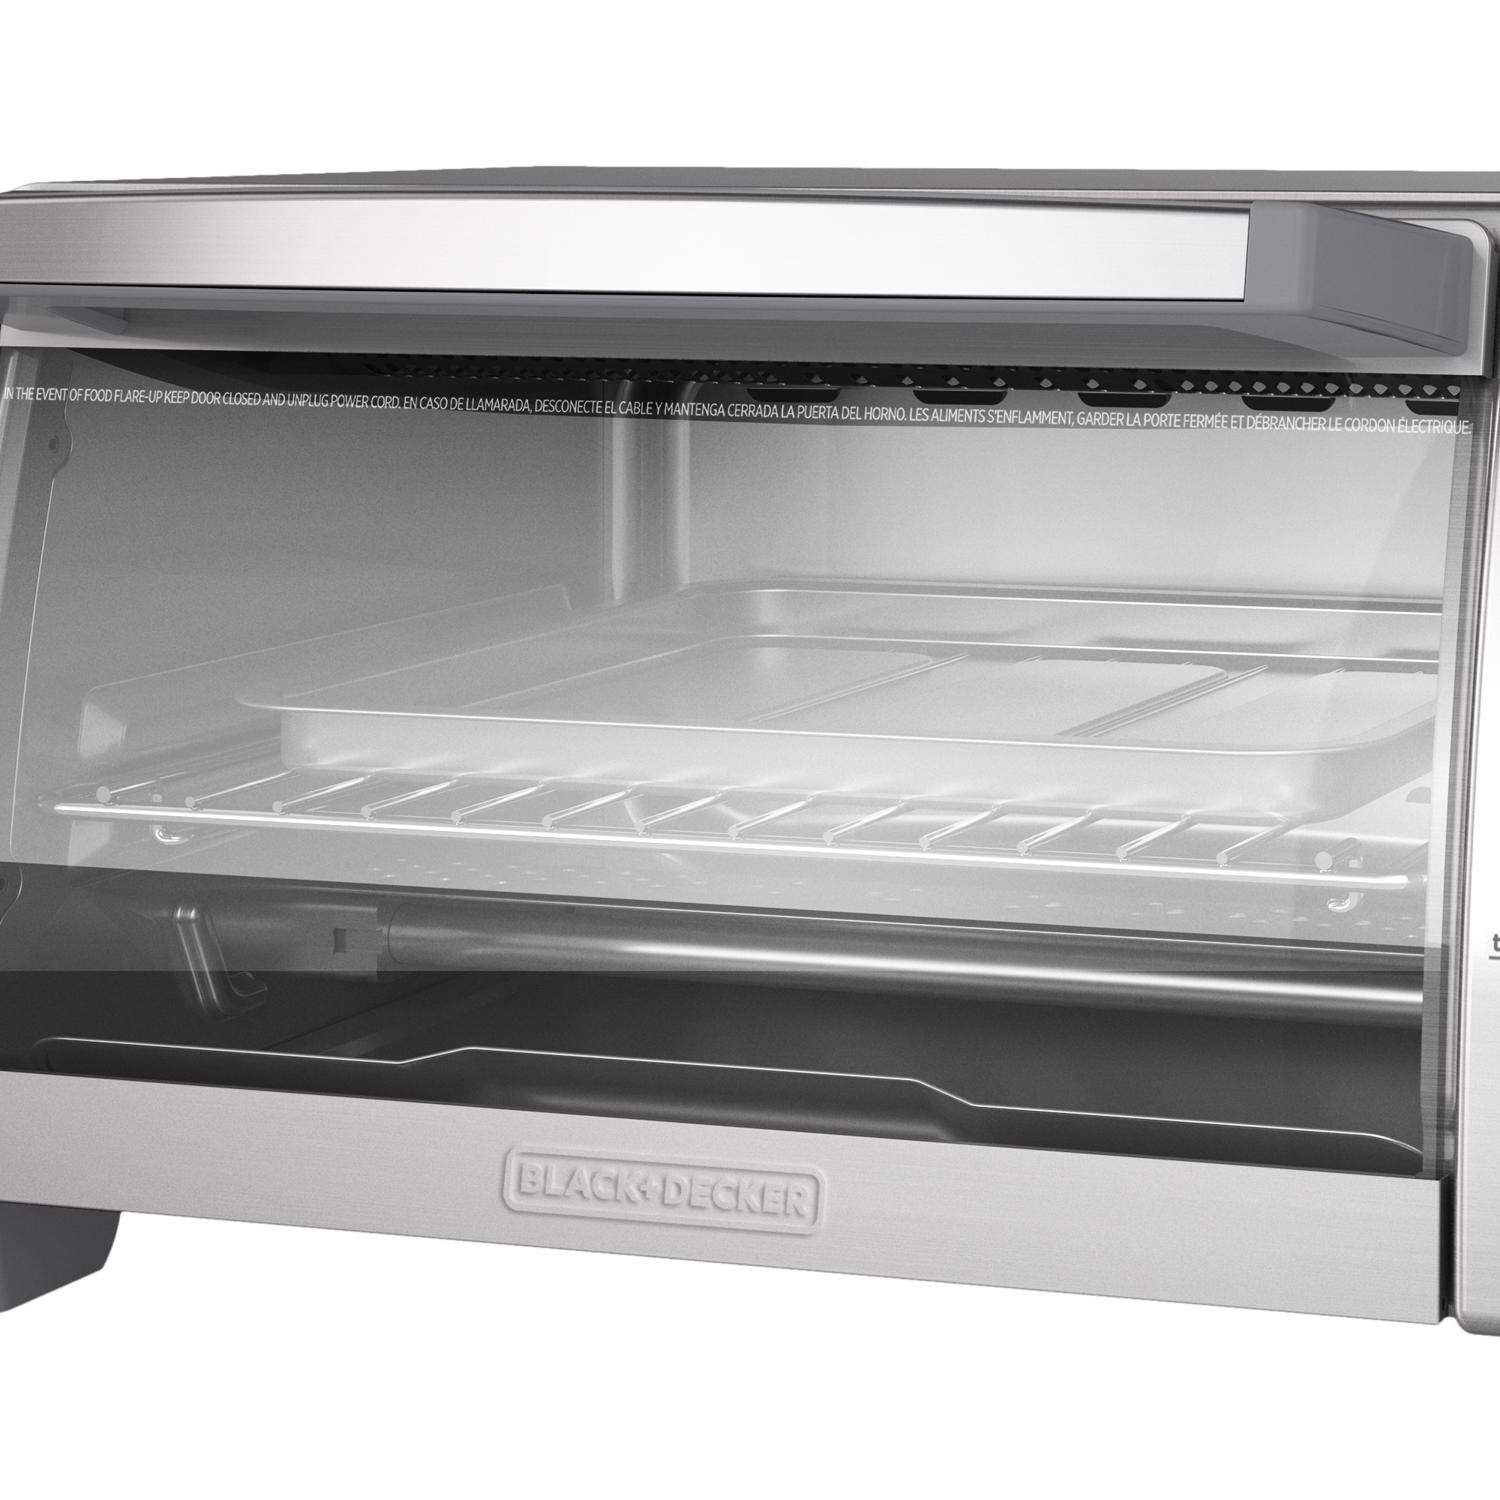 Black+Decker Stainless Steel Silver 6 slot Convection Toaster Oven 9.7 in.  H X 15.9 in. W X 12 in. D - Ace Hardware